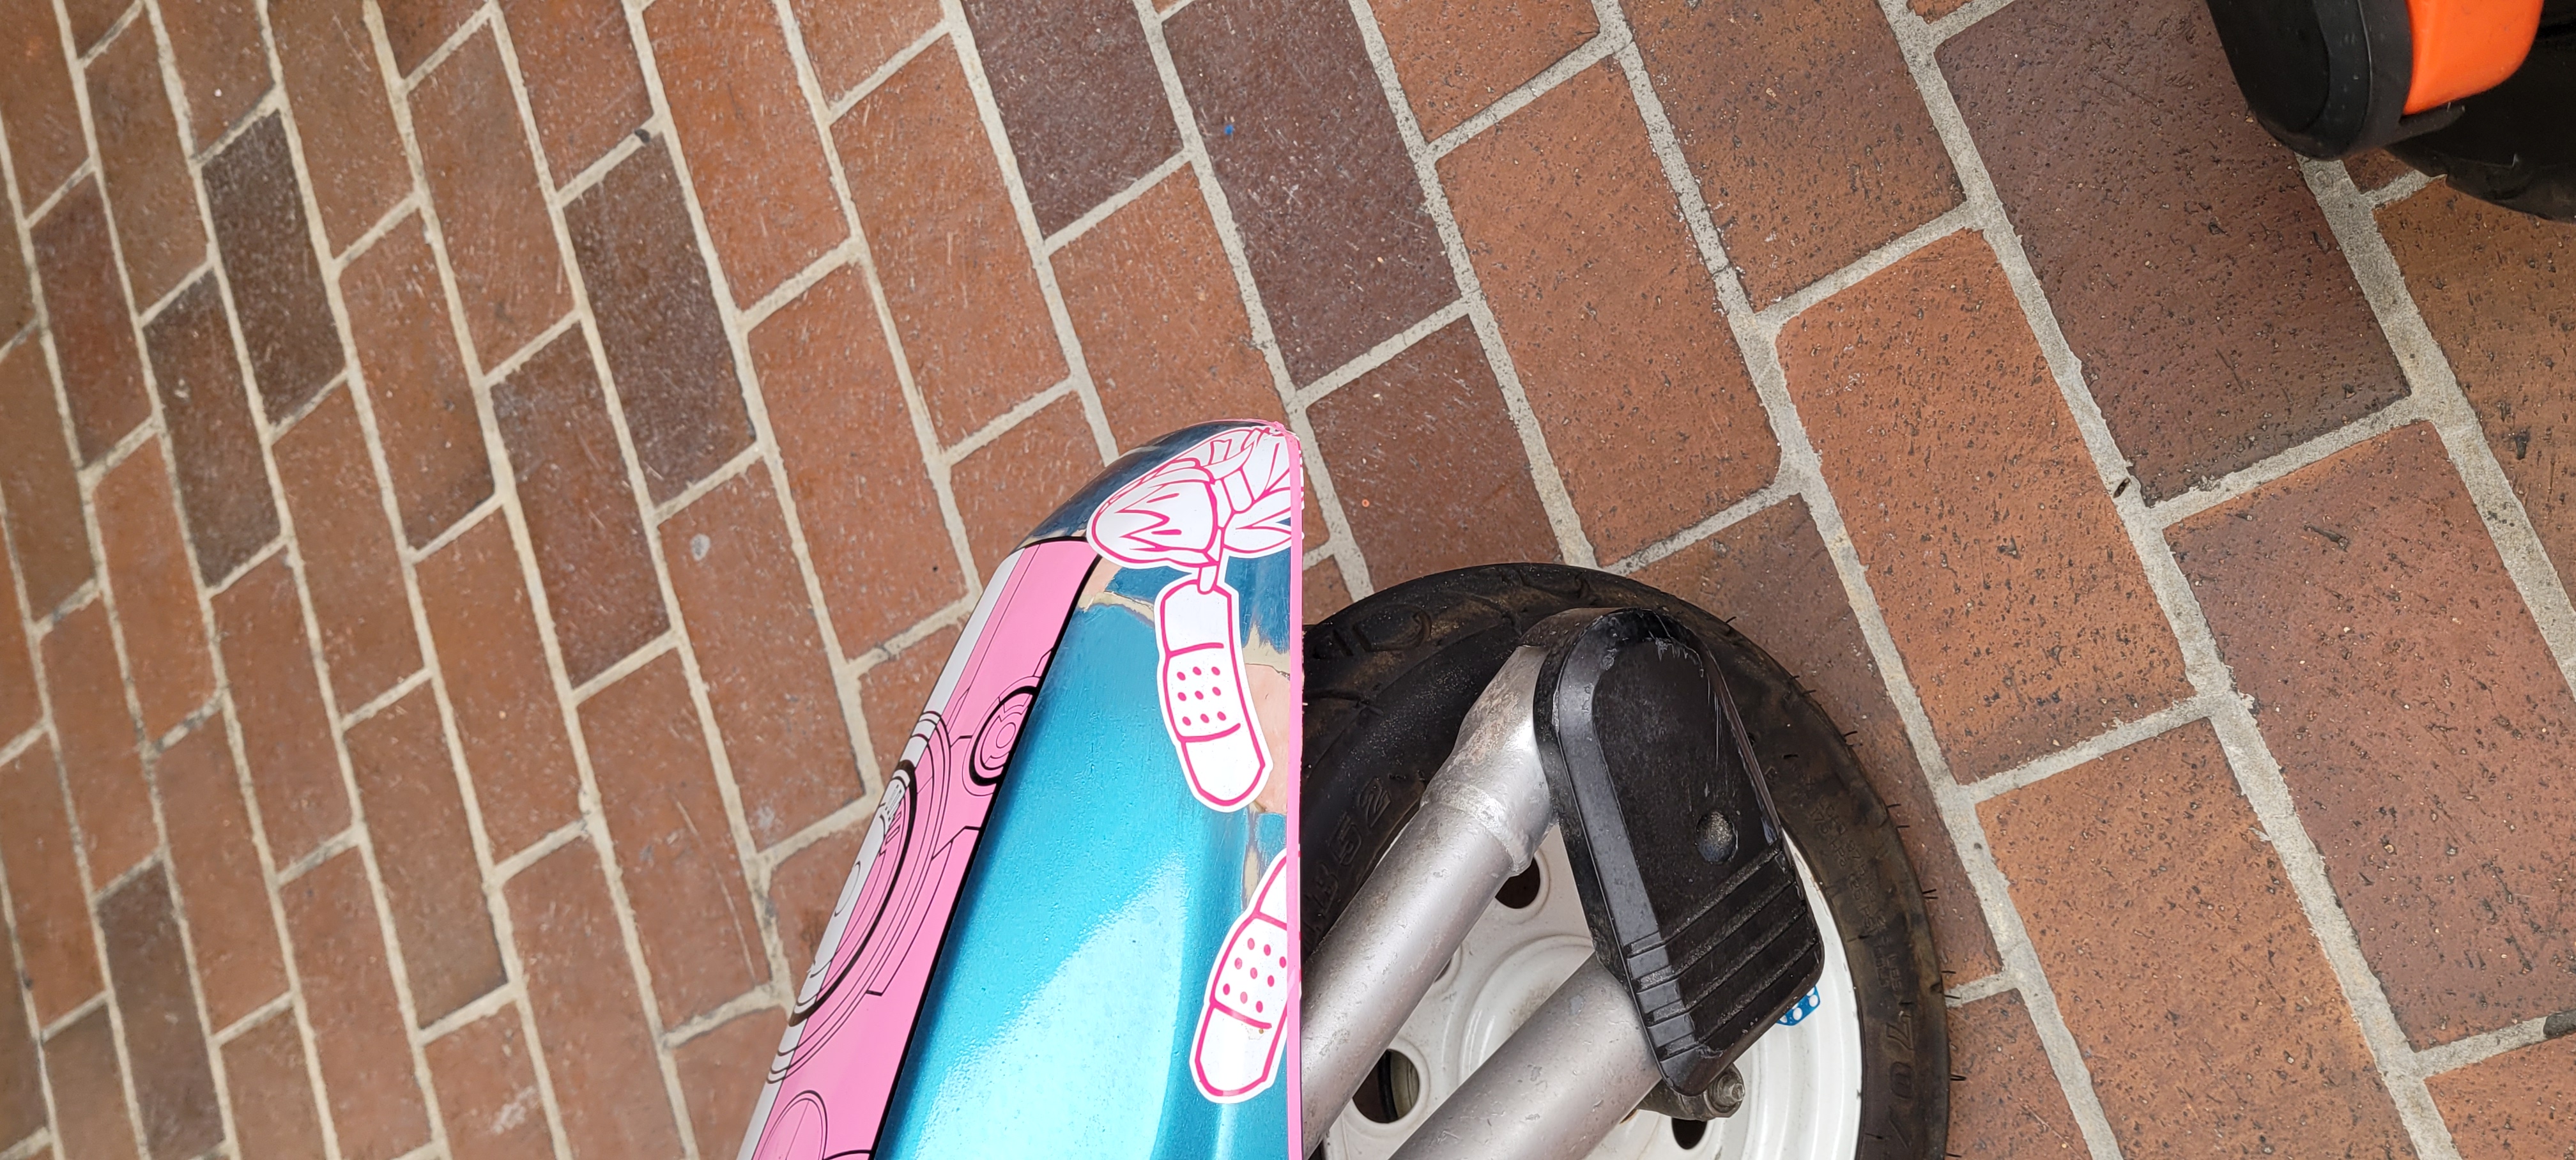 a close-up photo of the luka itasha bike. it shows the area near the front wheel of the bike, where pink and white bandage decals cover up cosmetic damage to the bike. a small cute luka is seen applying the bandages.